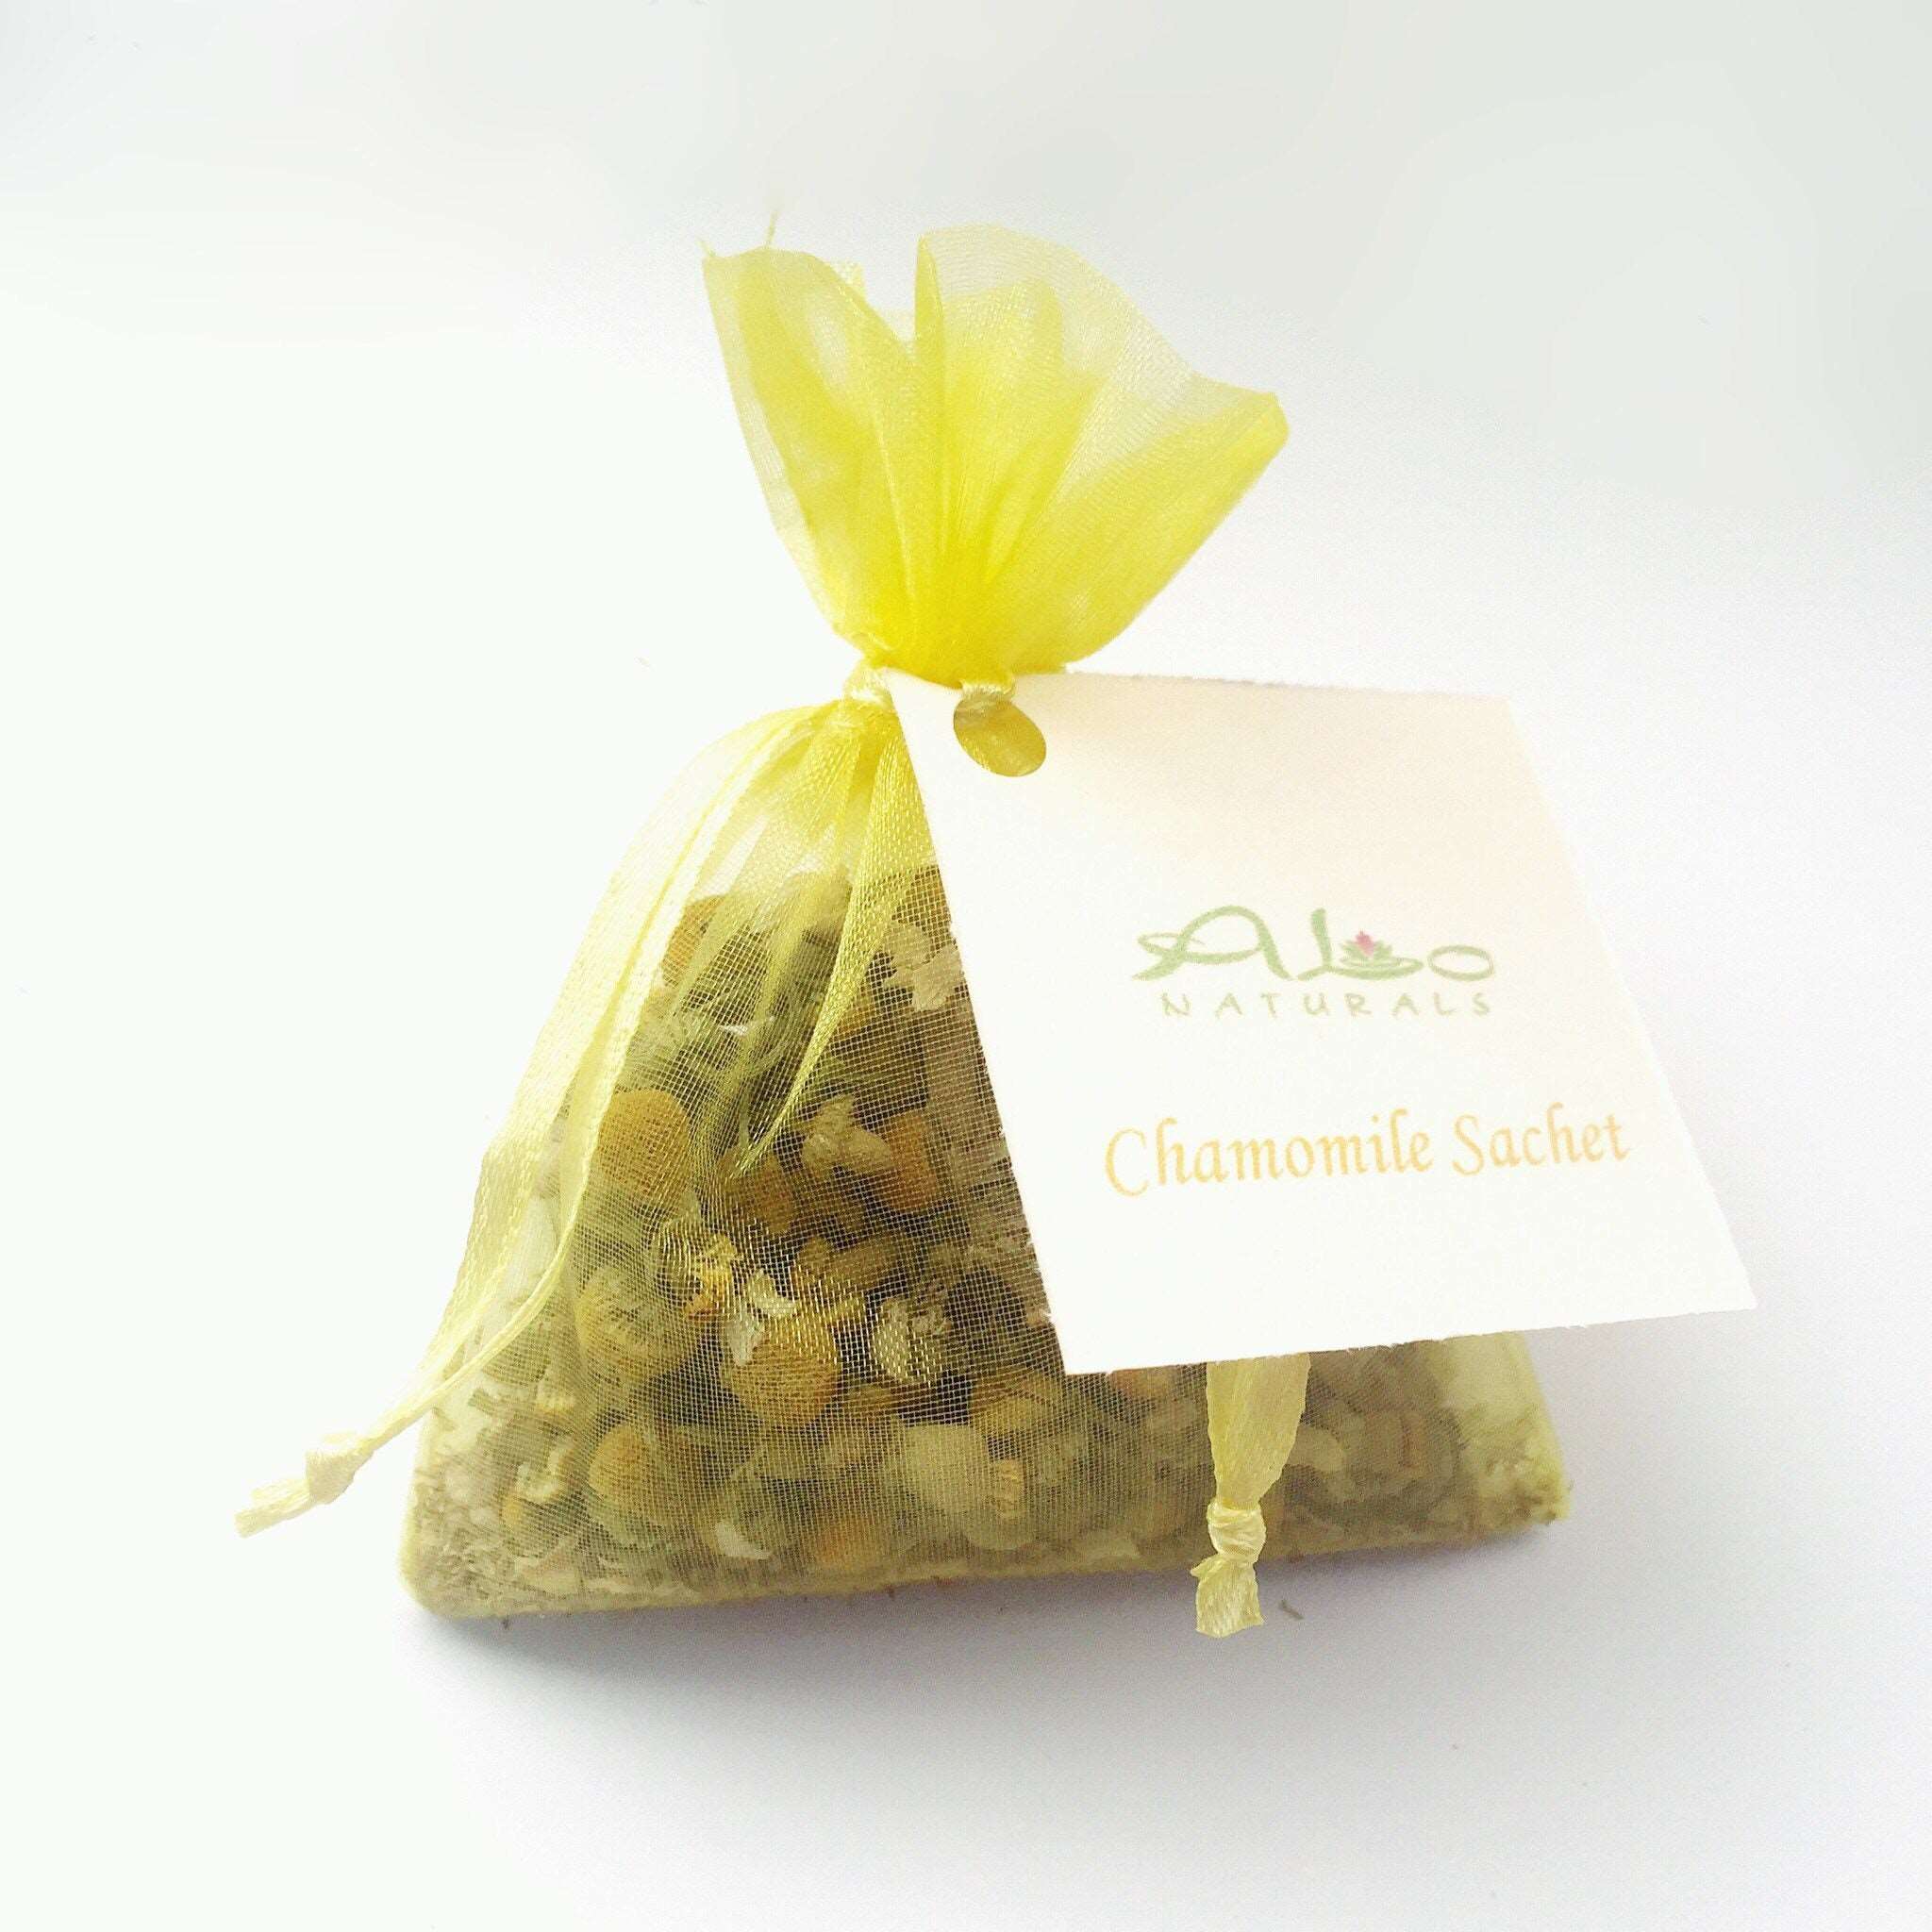 These calming Chamomile sachets are handmade by us with all natural botanicals.  Place in a drawer, closet, car, suitcase, purse, or anywhere you desire a fresh, pure, and natural scent!